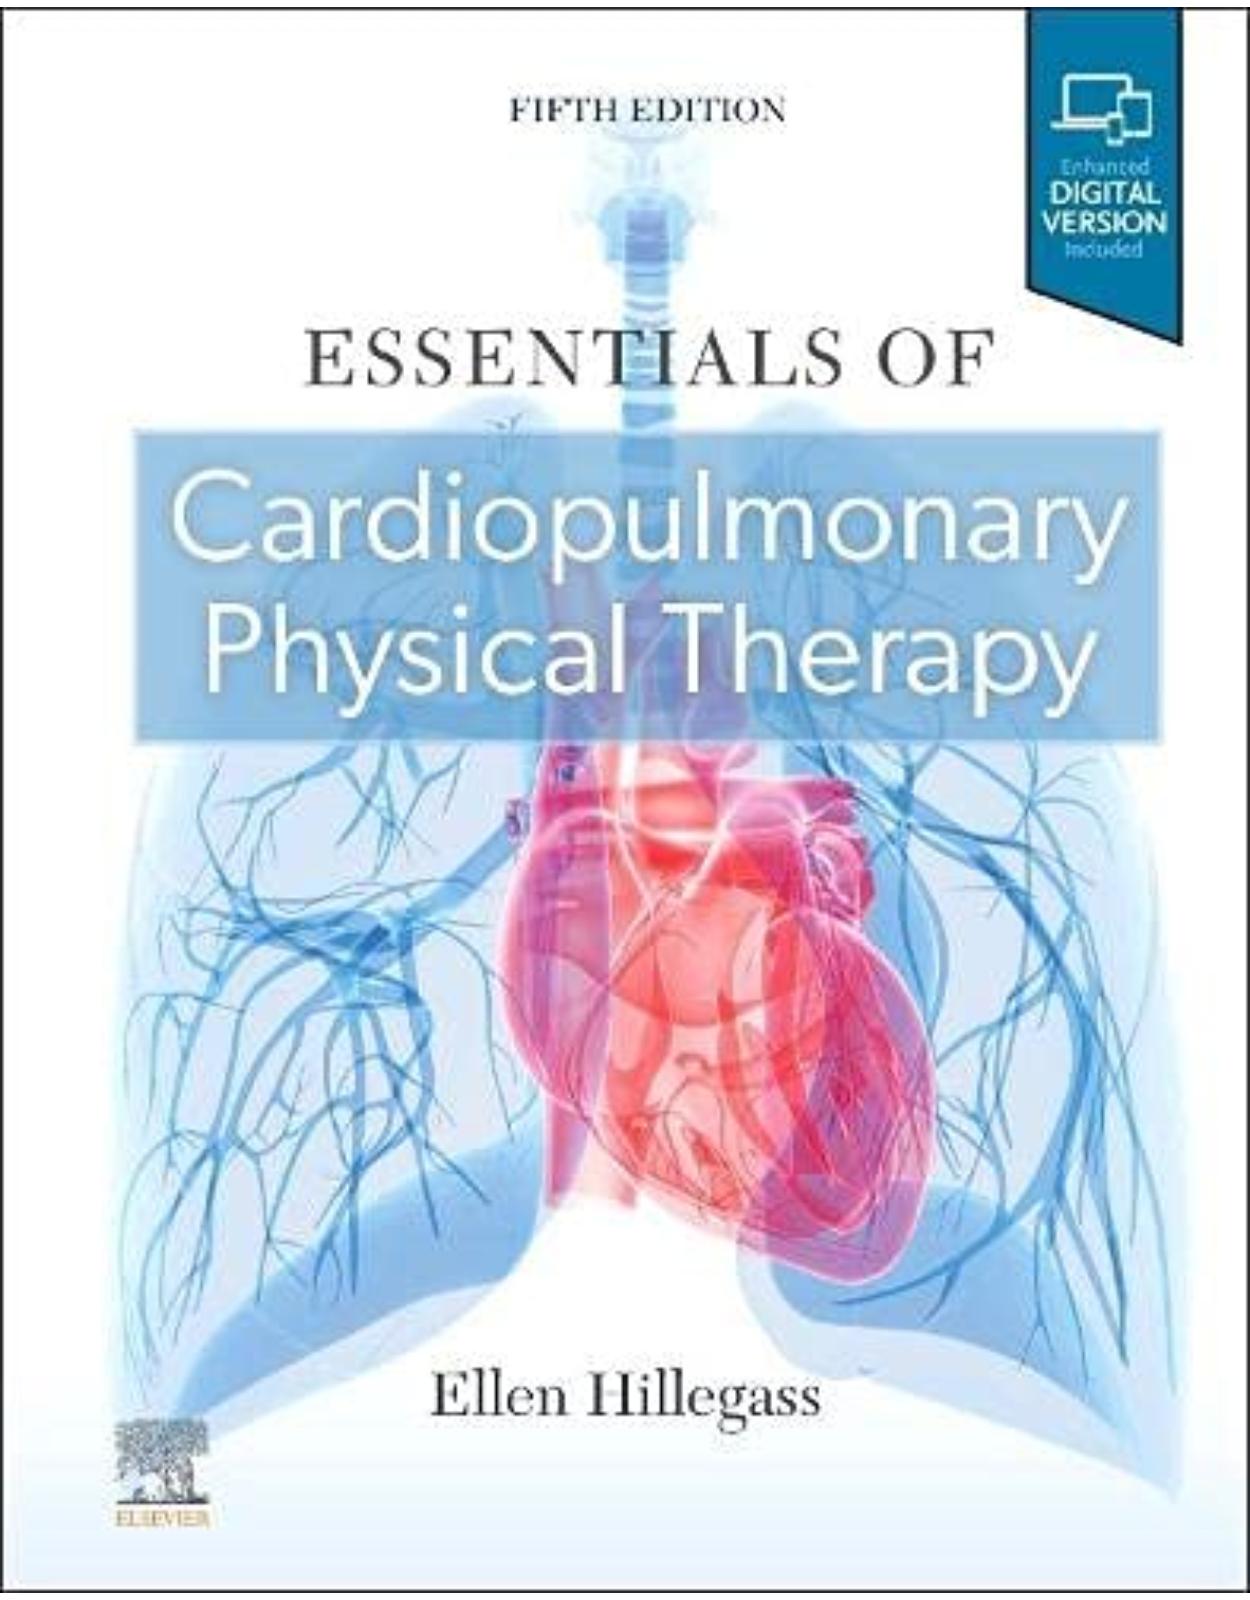 Essentials of Cardiopulmonary Physical Therapy